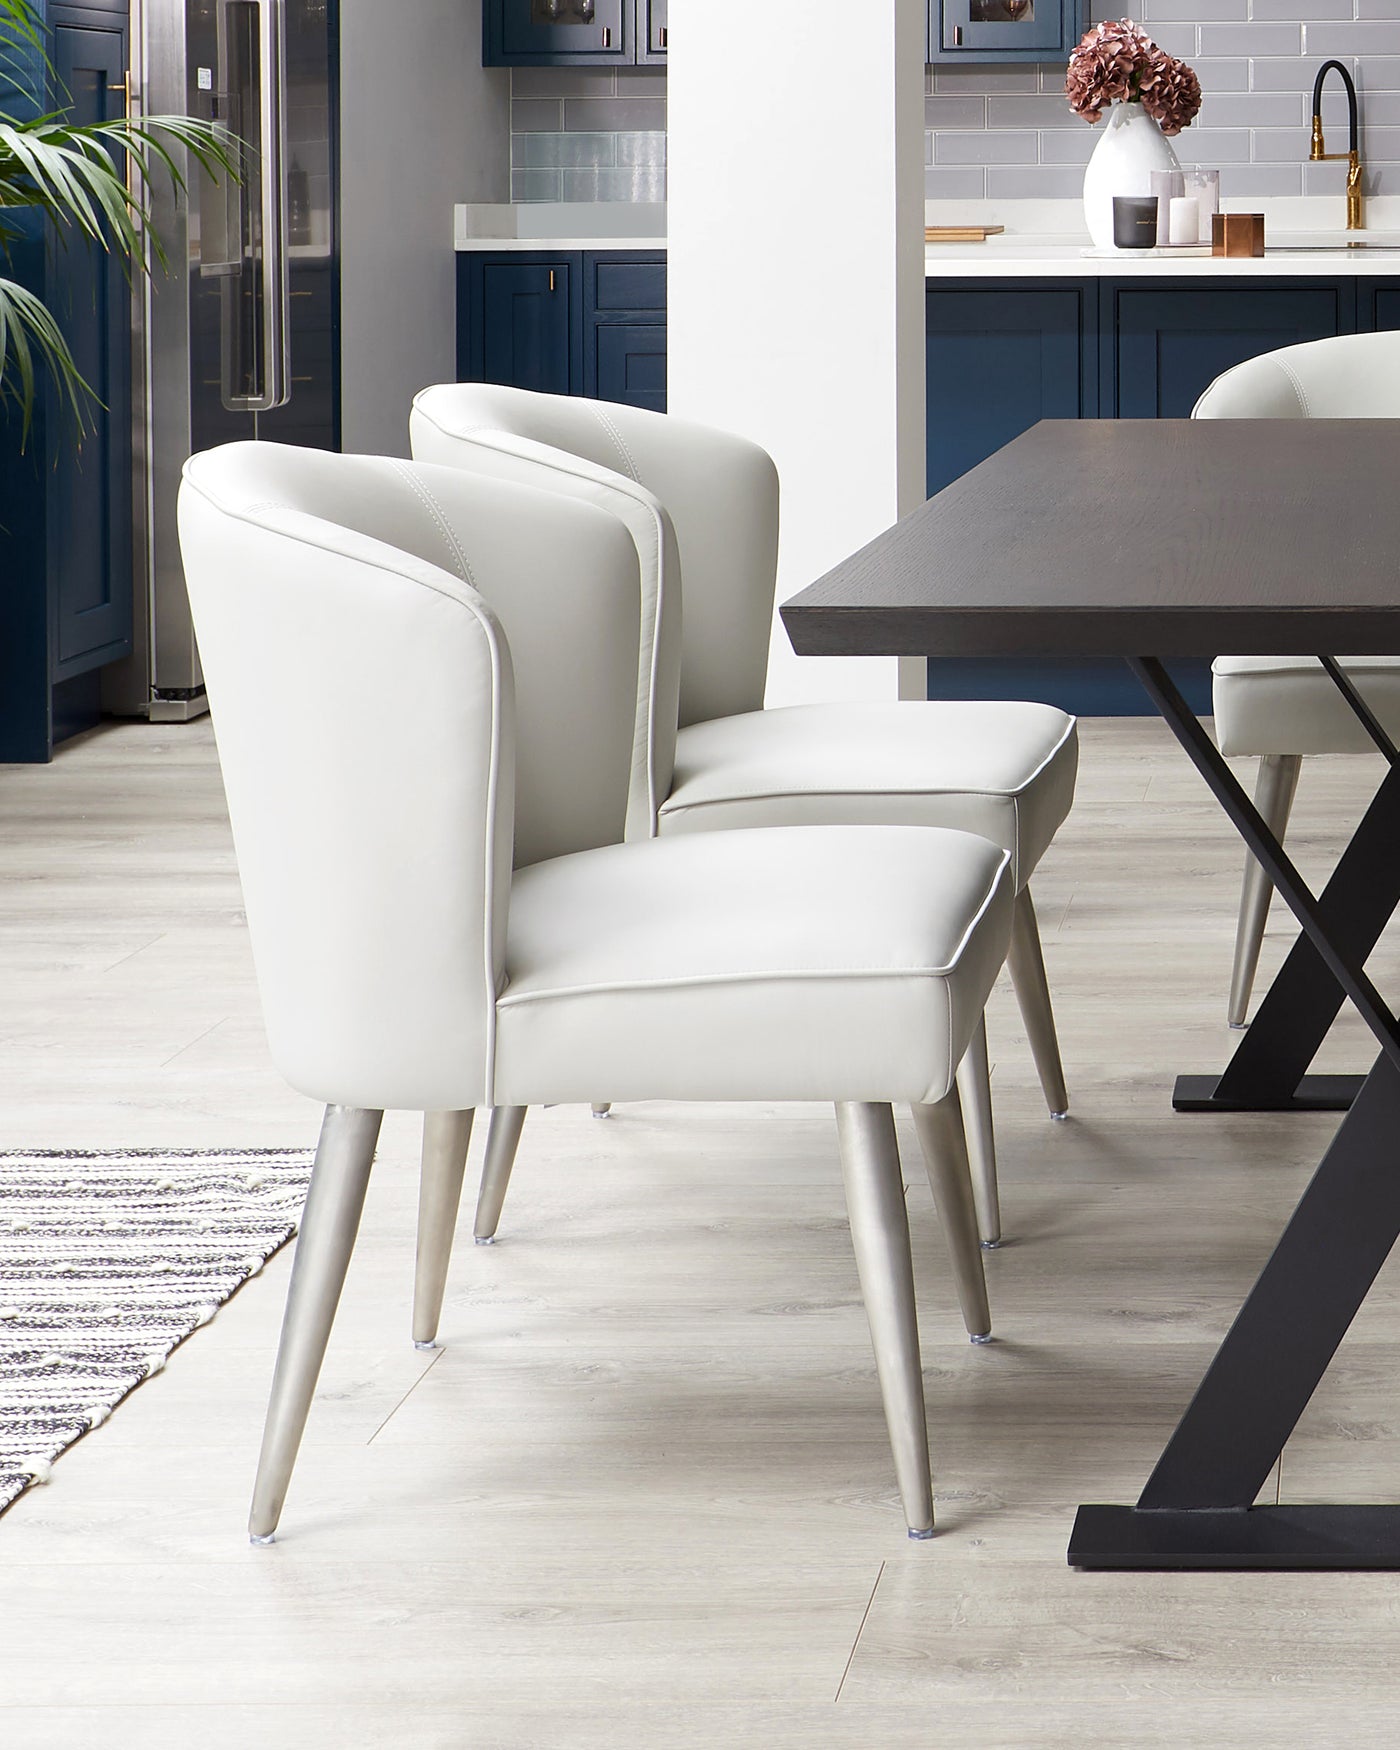 Elegant modern dining set featuring a dark wood table with black metal legs and a set of three sleek, light cream upholstered chairs with gently curved backs and angled metal legs. The scene is set against a contemporary kitchen backdrop with a blue cabinet finish and is complemented by a patterned rug on a light wooden floor.